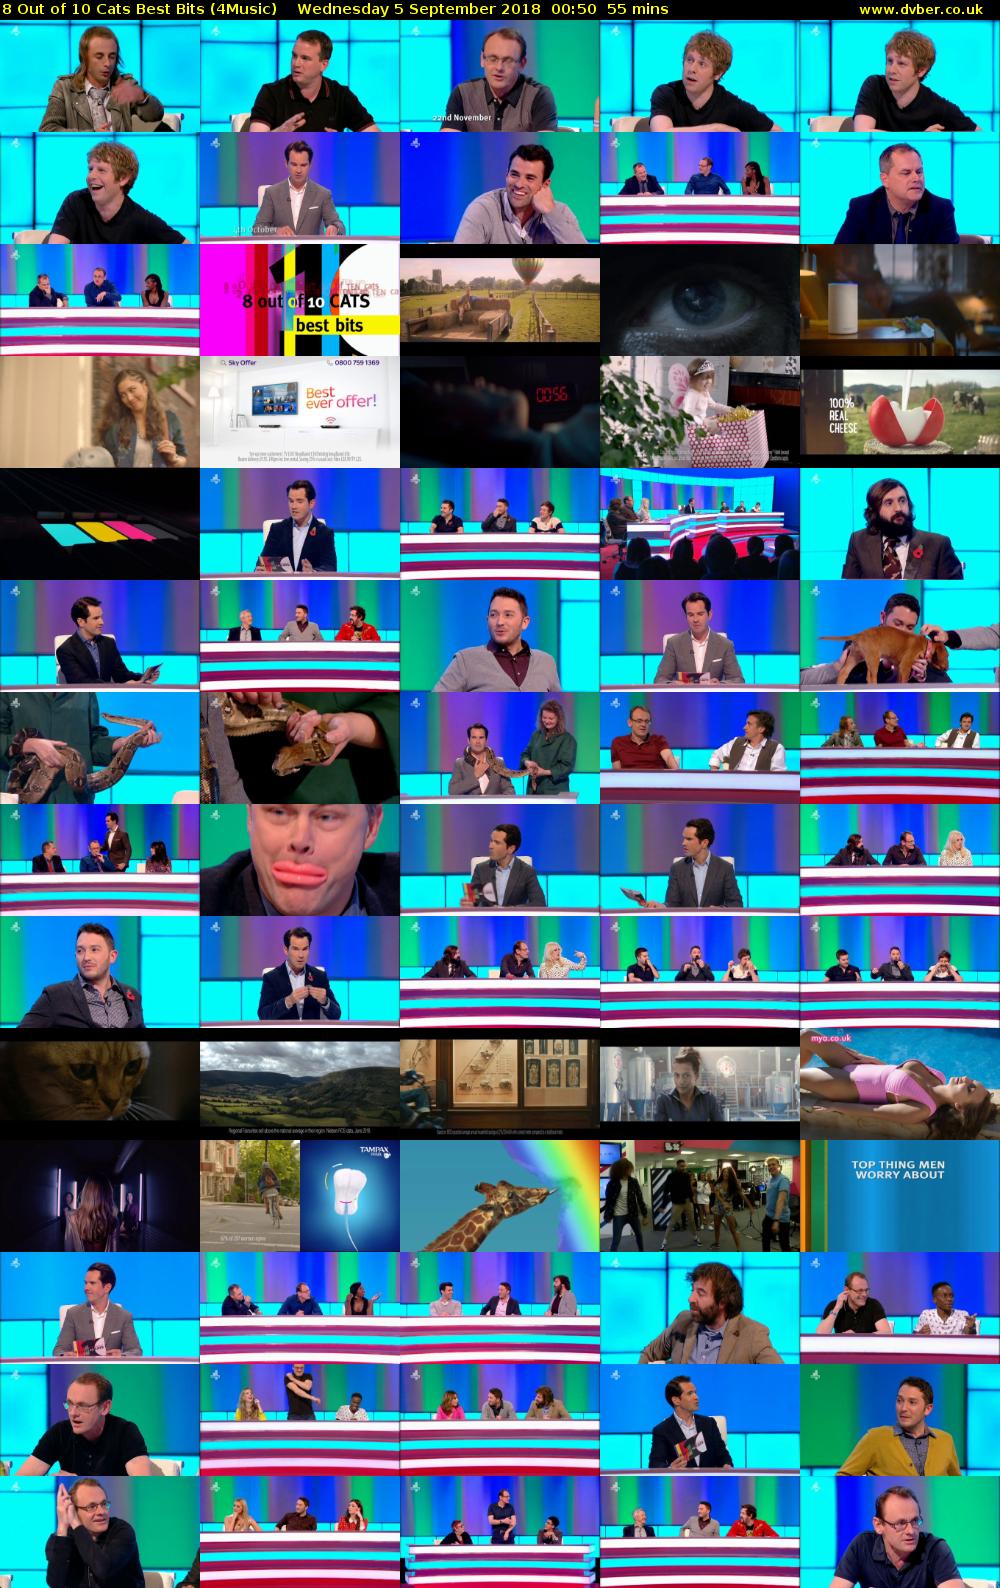 8 Out of 10 Cats Best Bits (4Music) Wednesday 5 September 2018 00:50 - 01:45